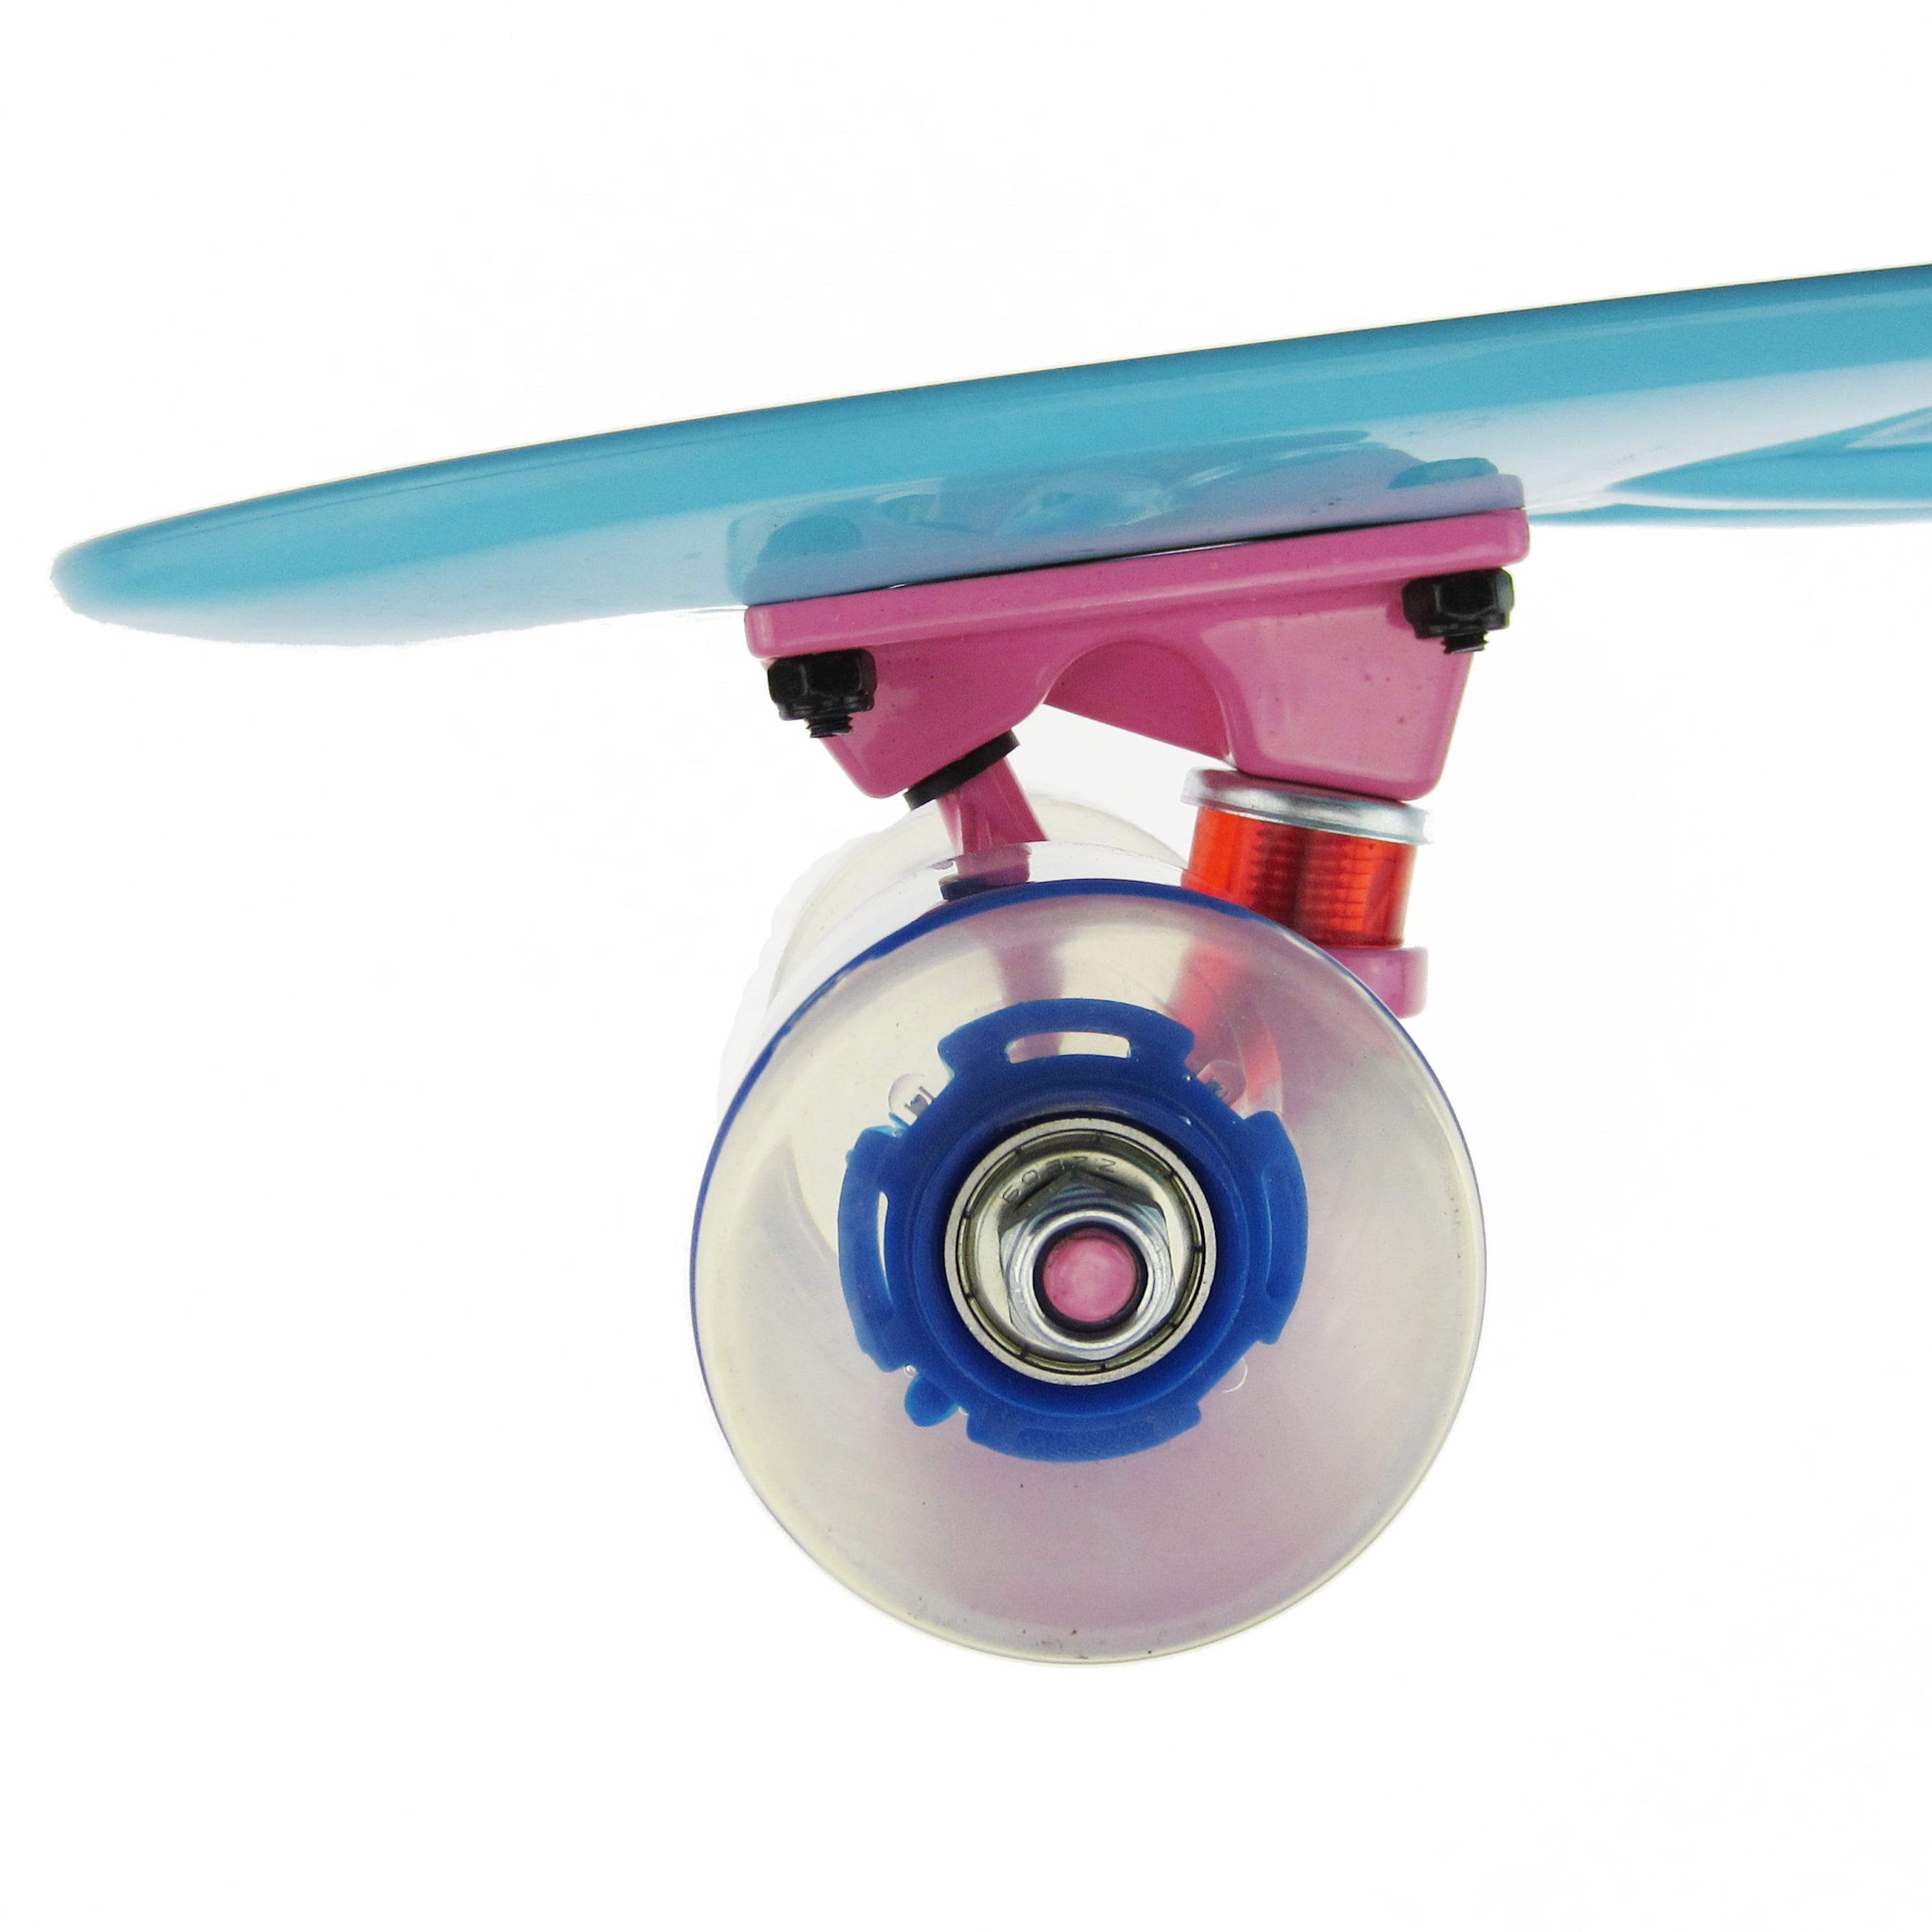 Details about   Complete Mini Skateboards 22 Inch Cruiser w/ LED Light Up Wheels for Beginners 